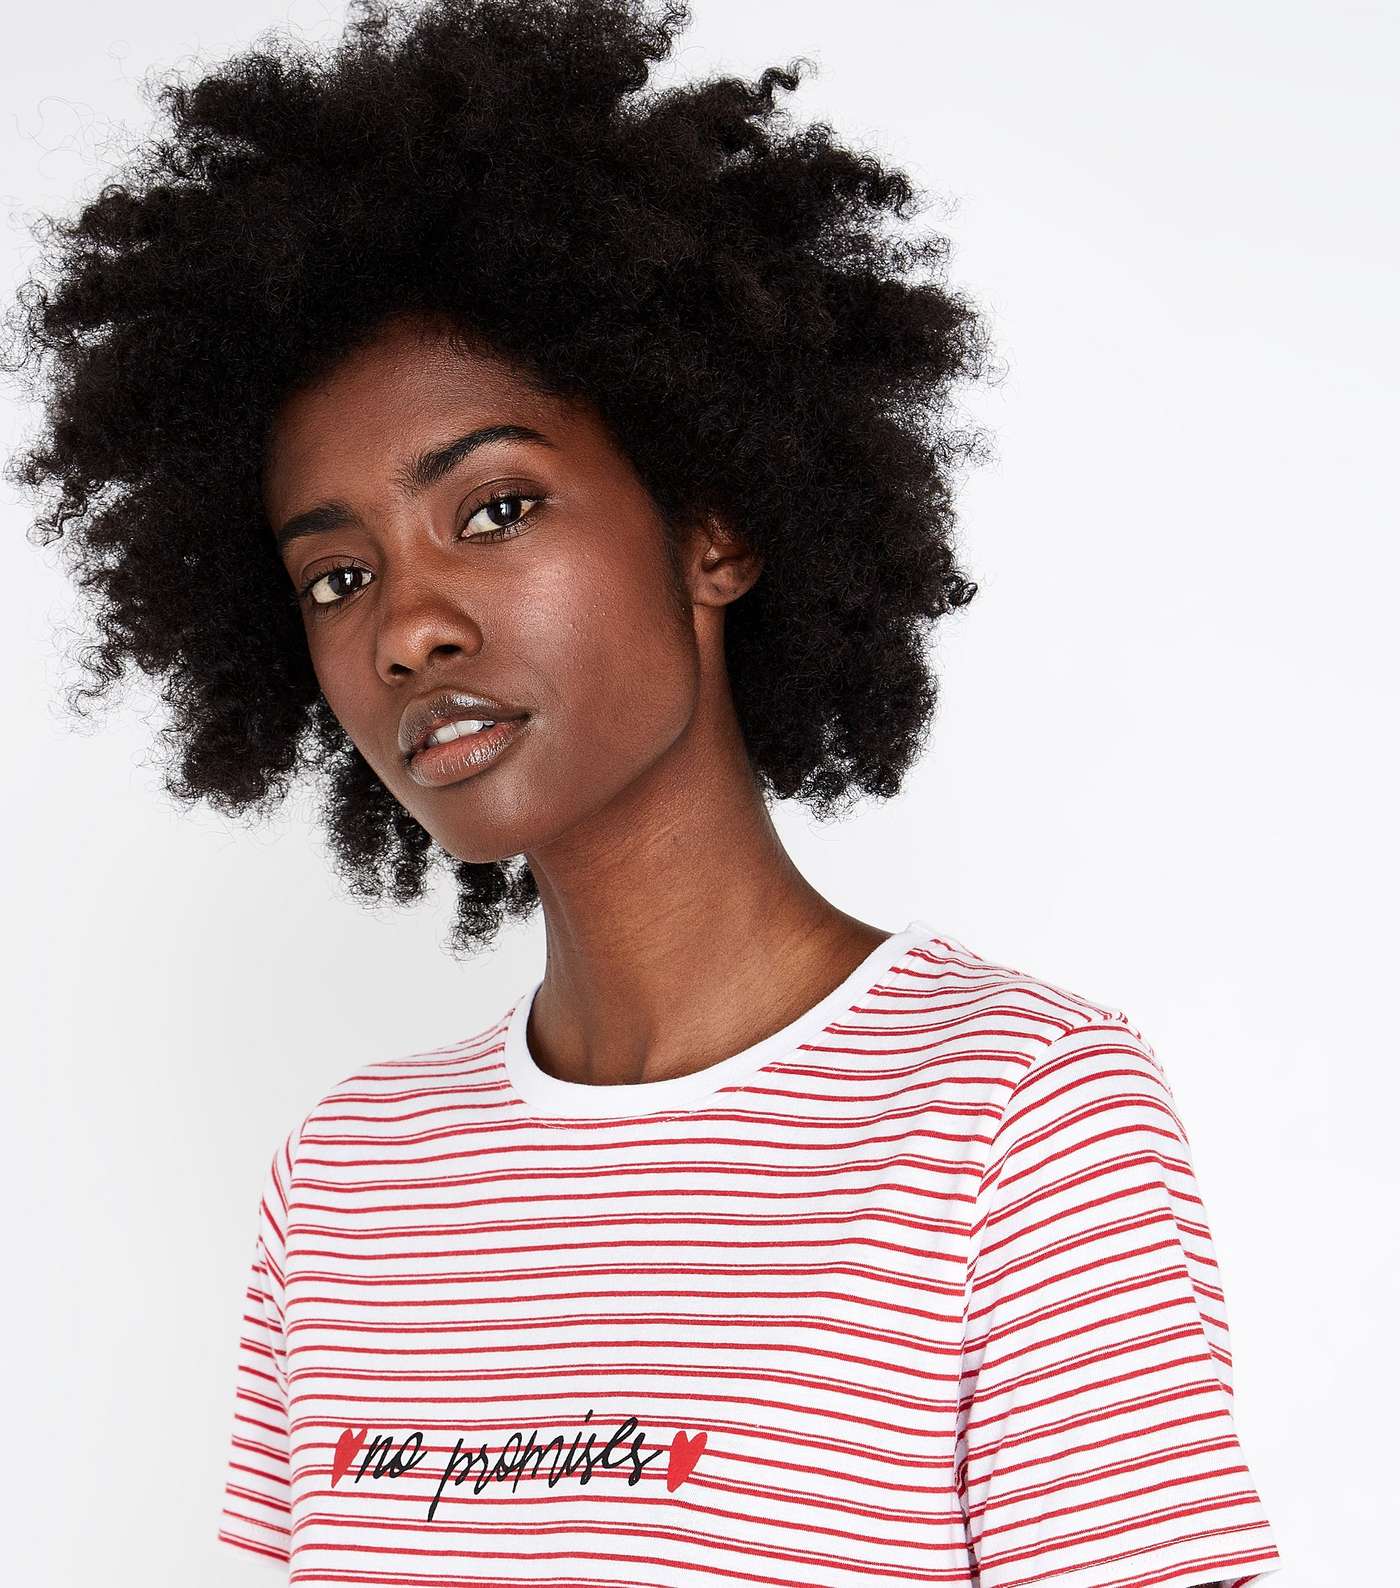 Red Stripe No Promises Embroidered T-Shirt Image 5